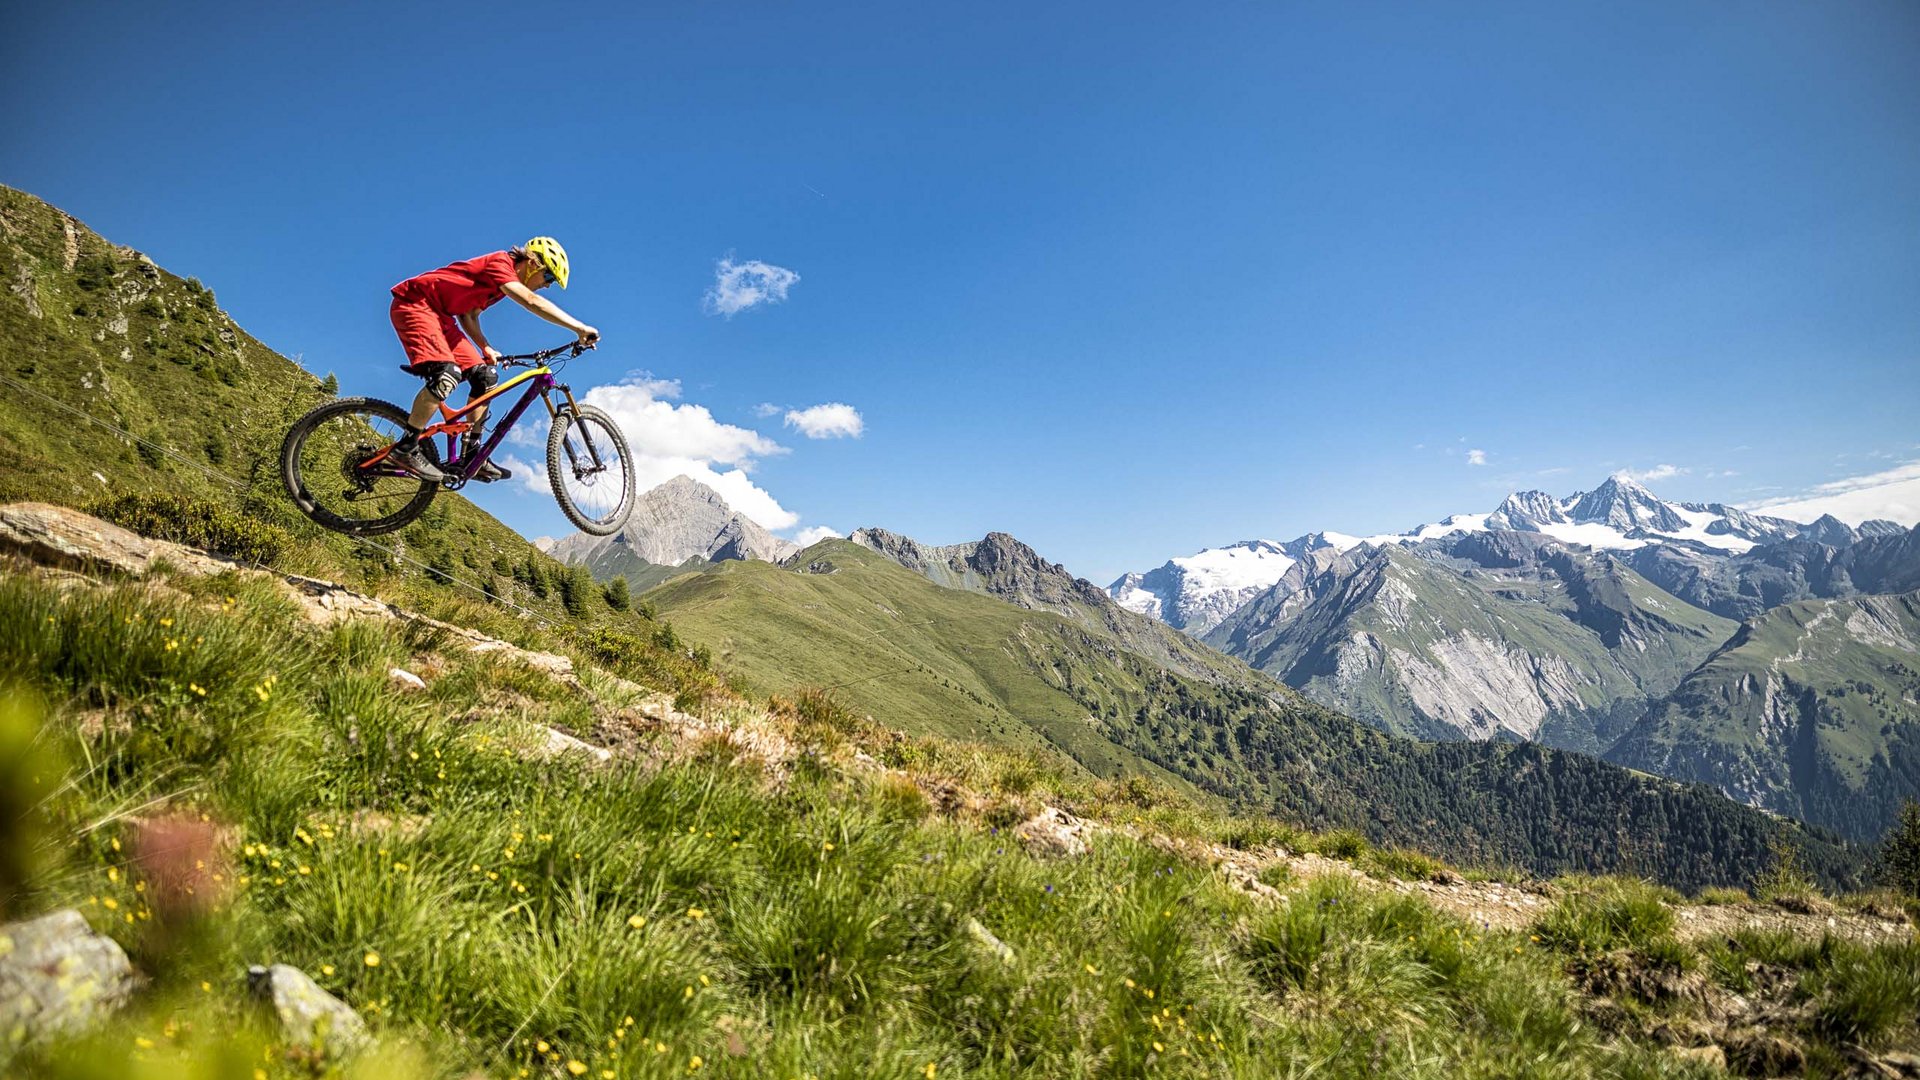 Mountain biking routes for all levels